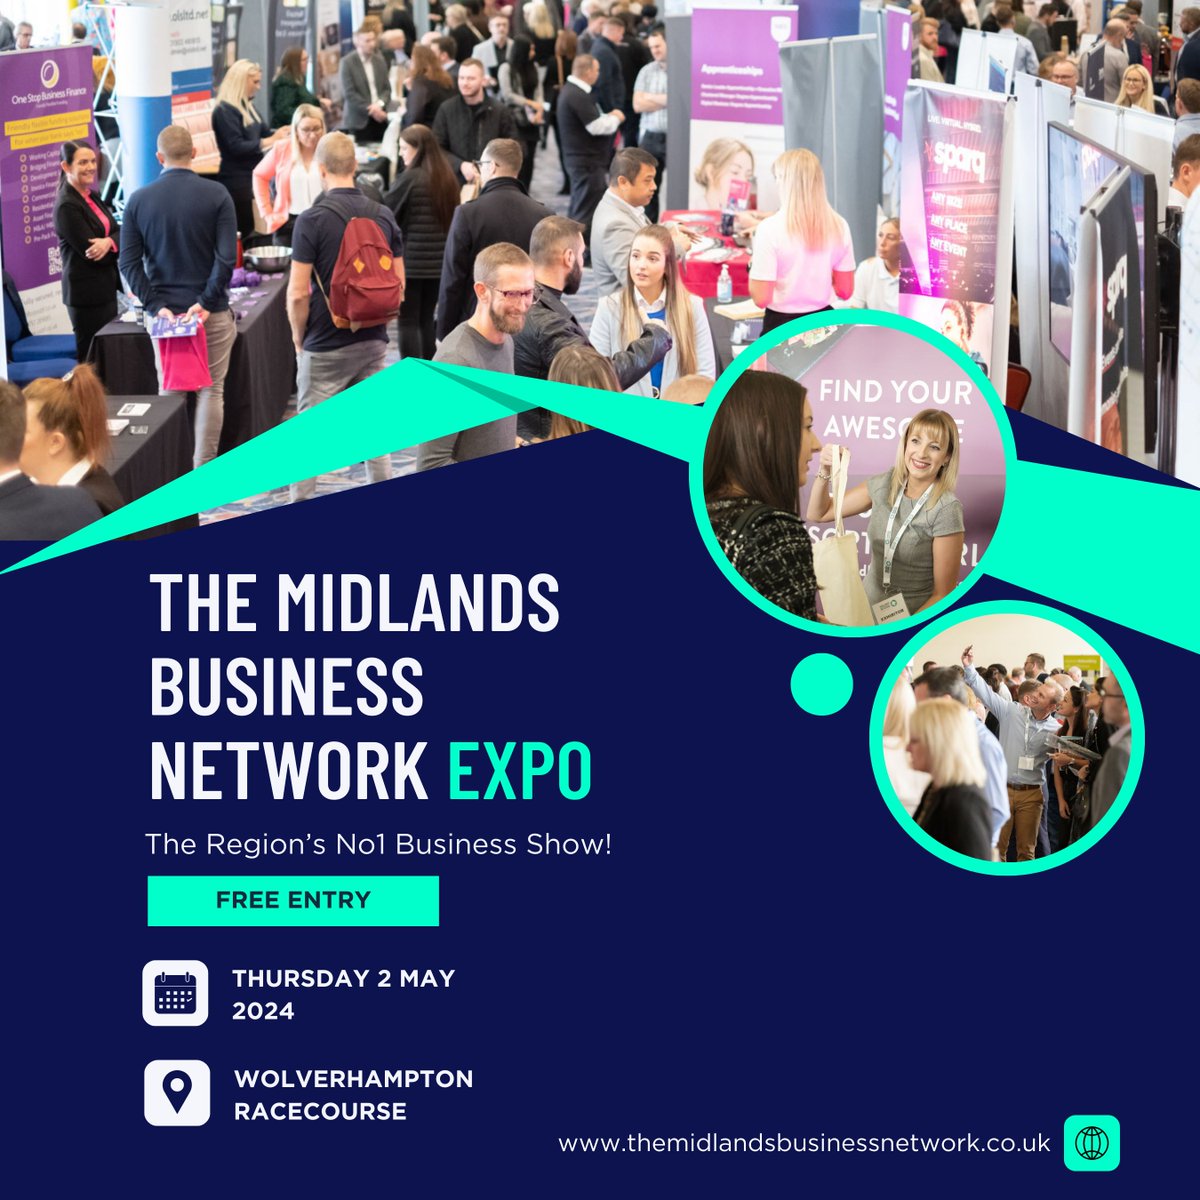 We are exciting to be exhibiting at The Midlands Business Network Expo on Thursday 2nd May 2024 🌟

🔵Book your free ticket here: themidlandsbusinessnetwork.co.uk/events/the-mid…

Hope to see you there 👋

#MBNEXPO2024 #shropshirebusiness #corporategifting #expos #corporateevents